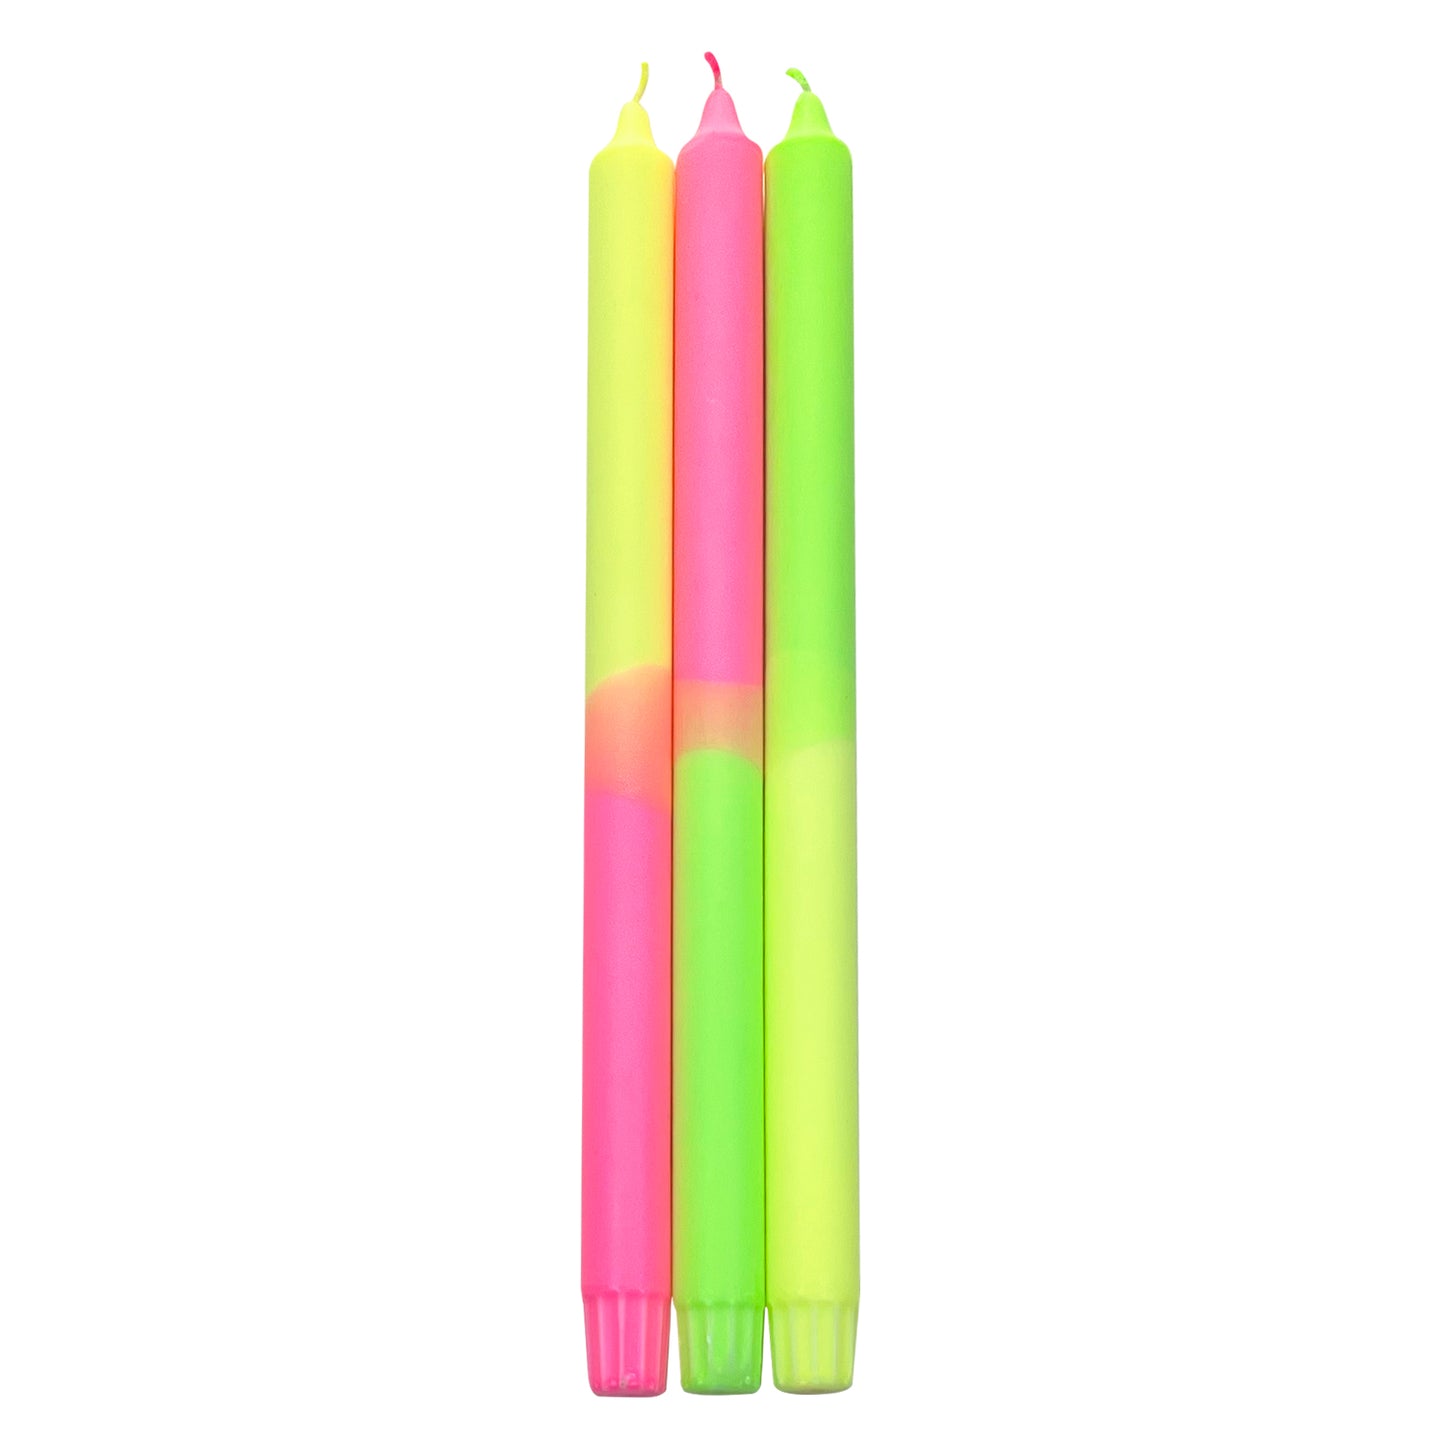 Dip Dye Neon 35 cm - XL  - Set of 3 - Candle - No Drip - Made in Denmark